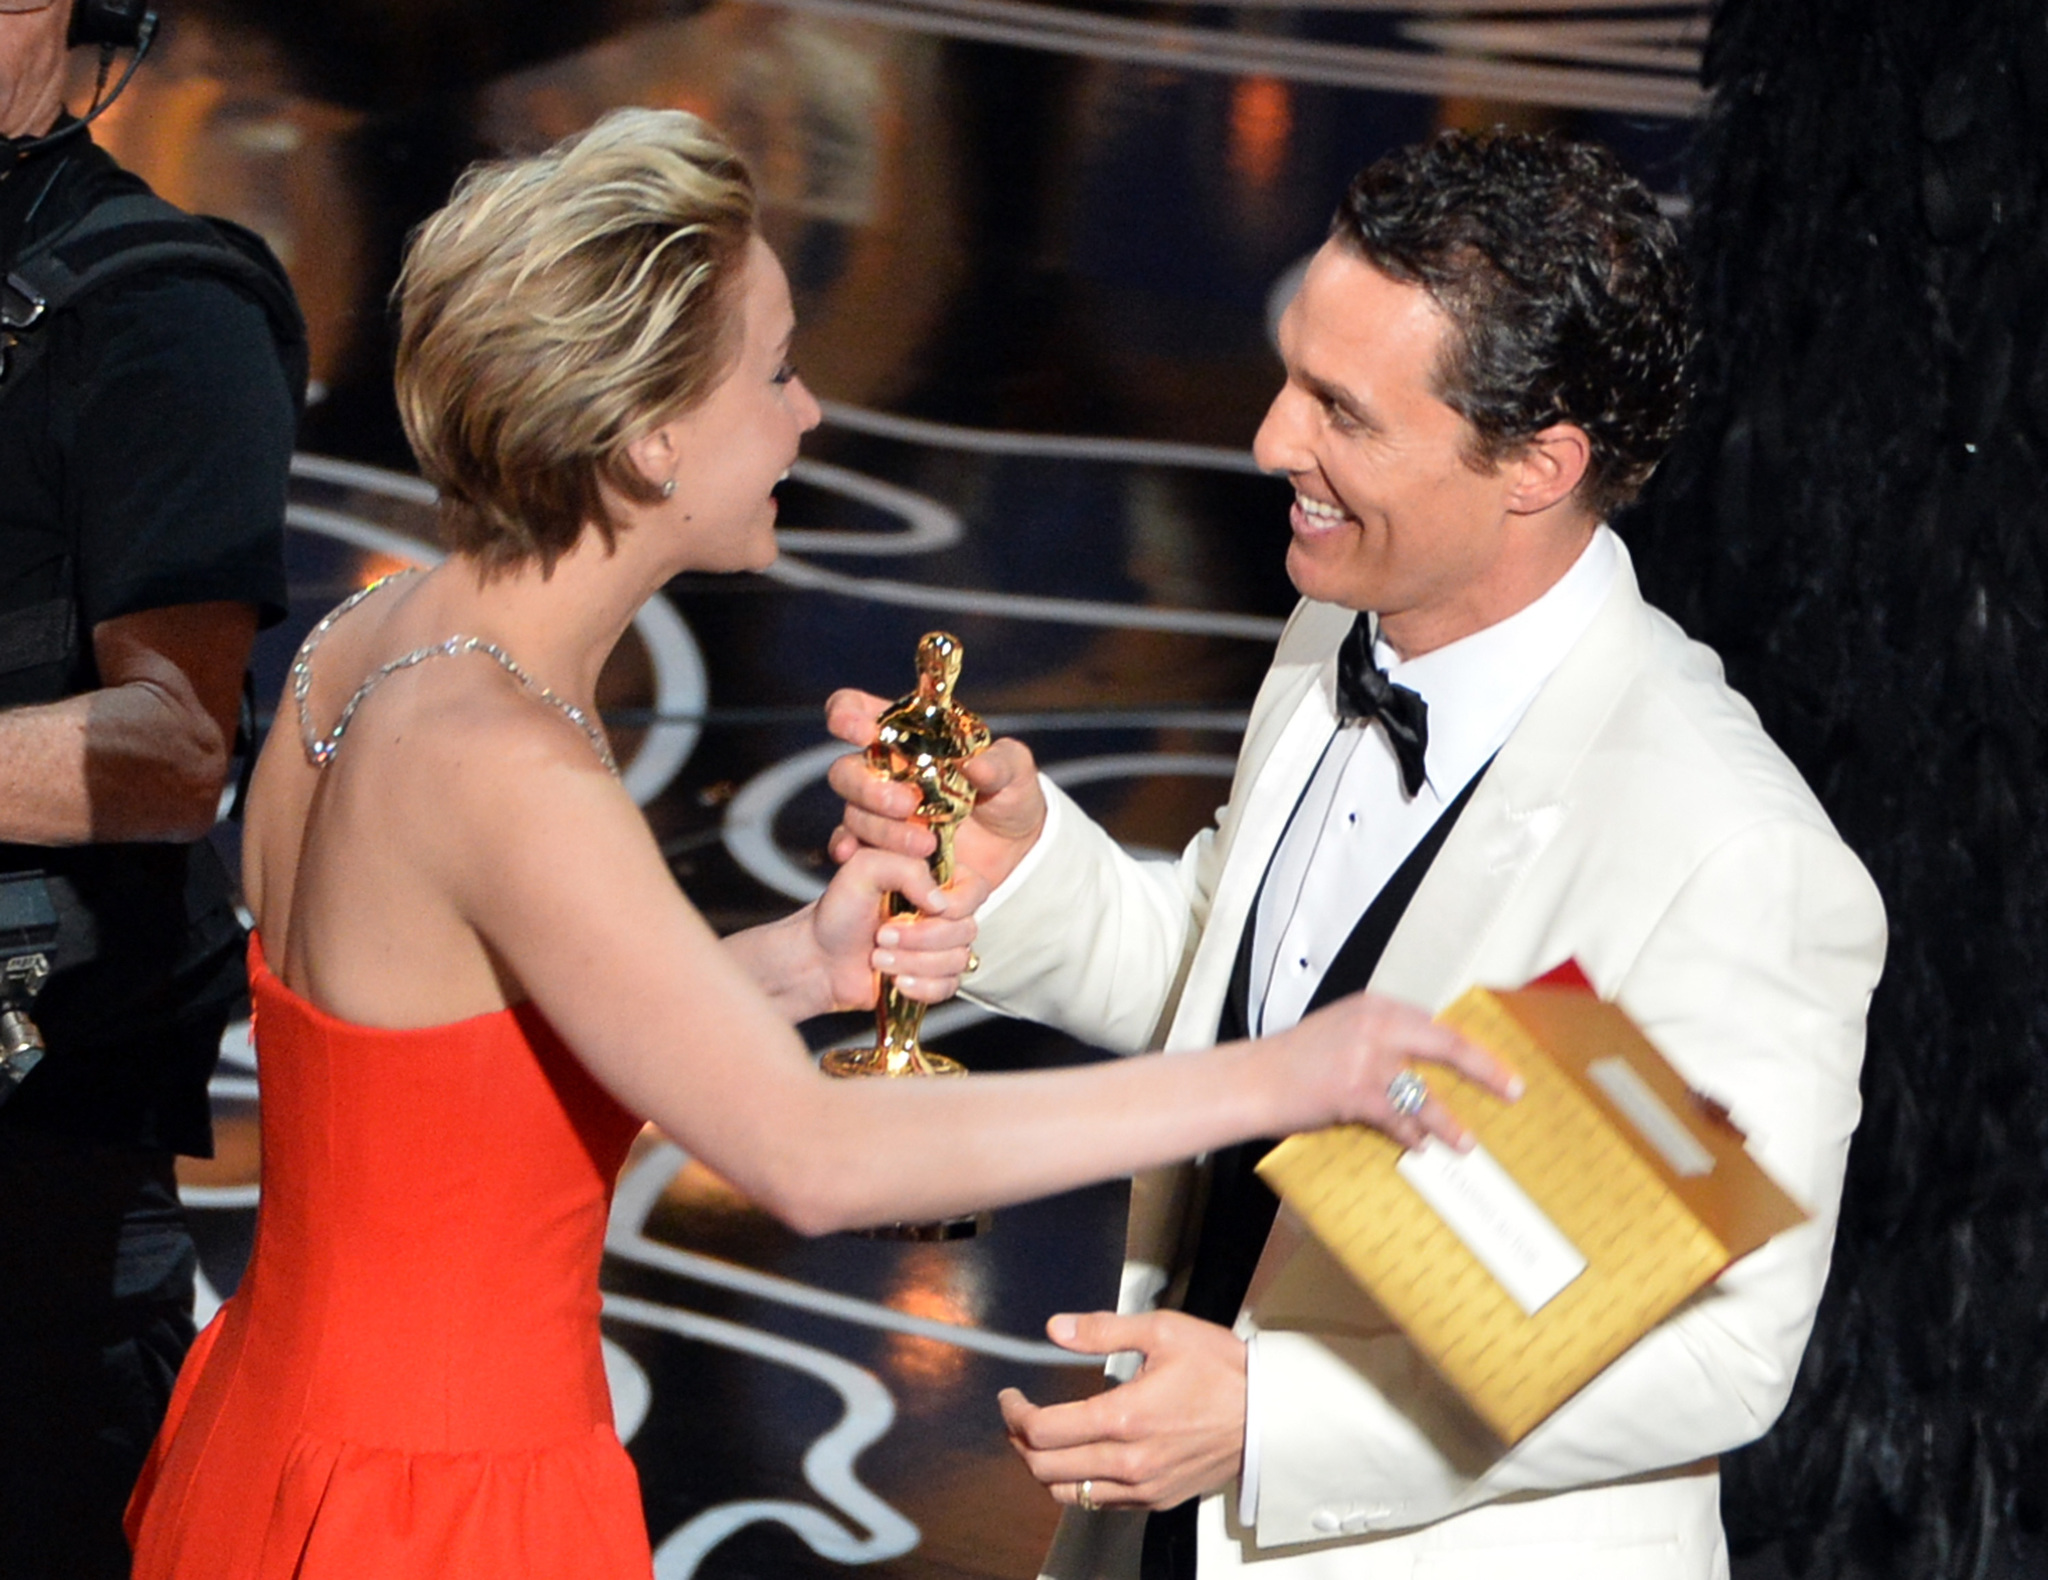 Matthew McConaughey and Jennifer Lawrence at event of The Oscars (2014)